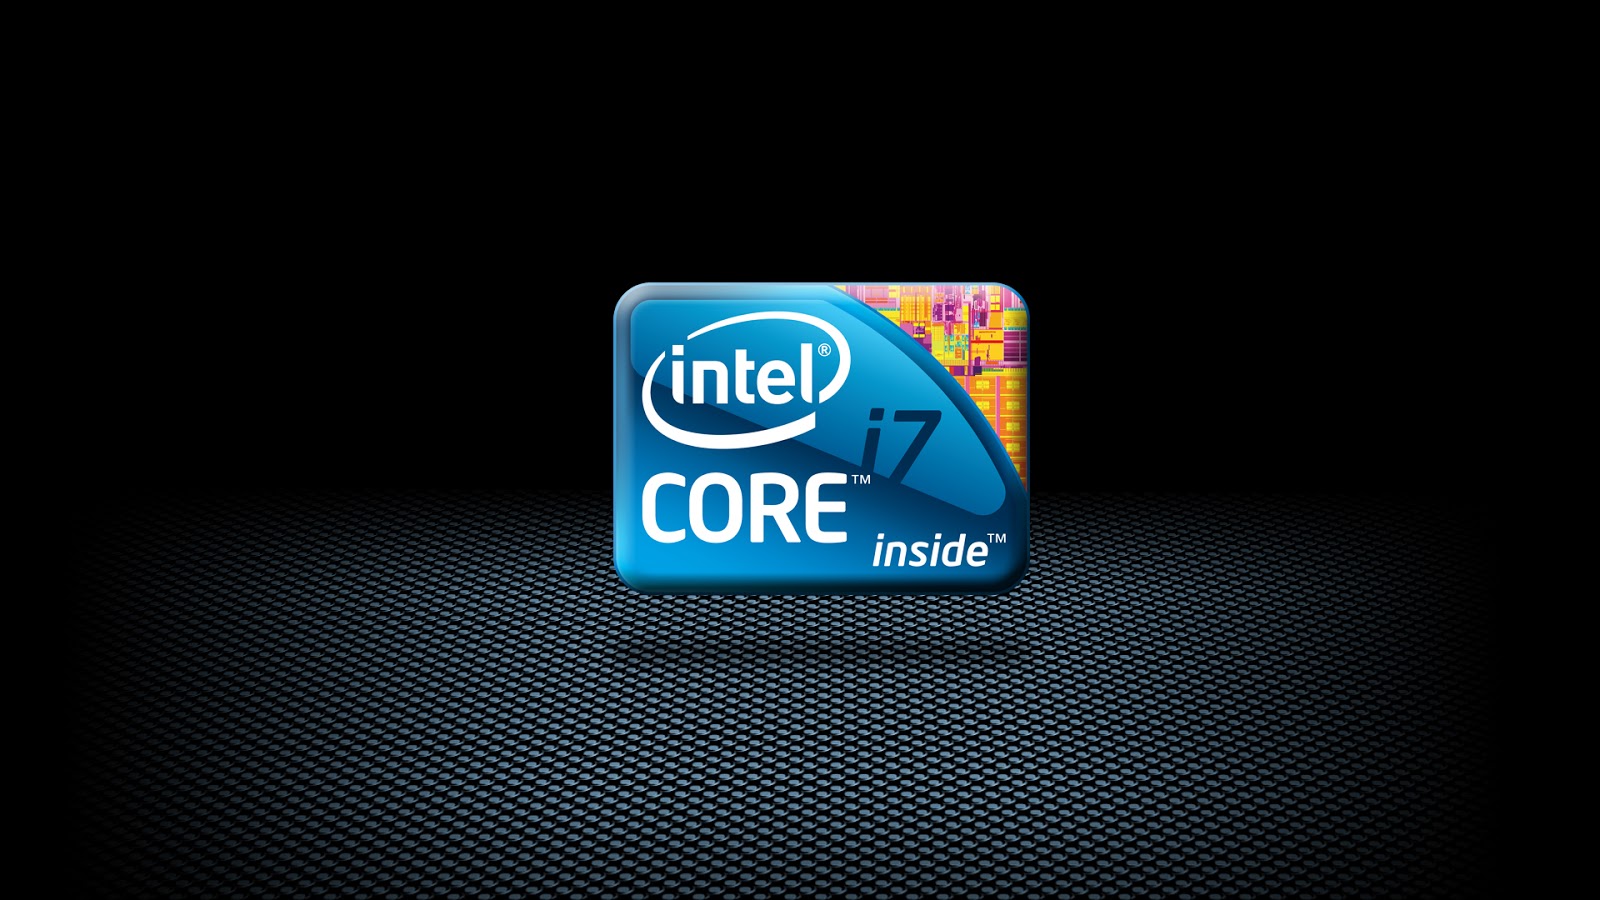 wallpapers you can download your favorite hd i7 processors wallpapers